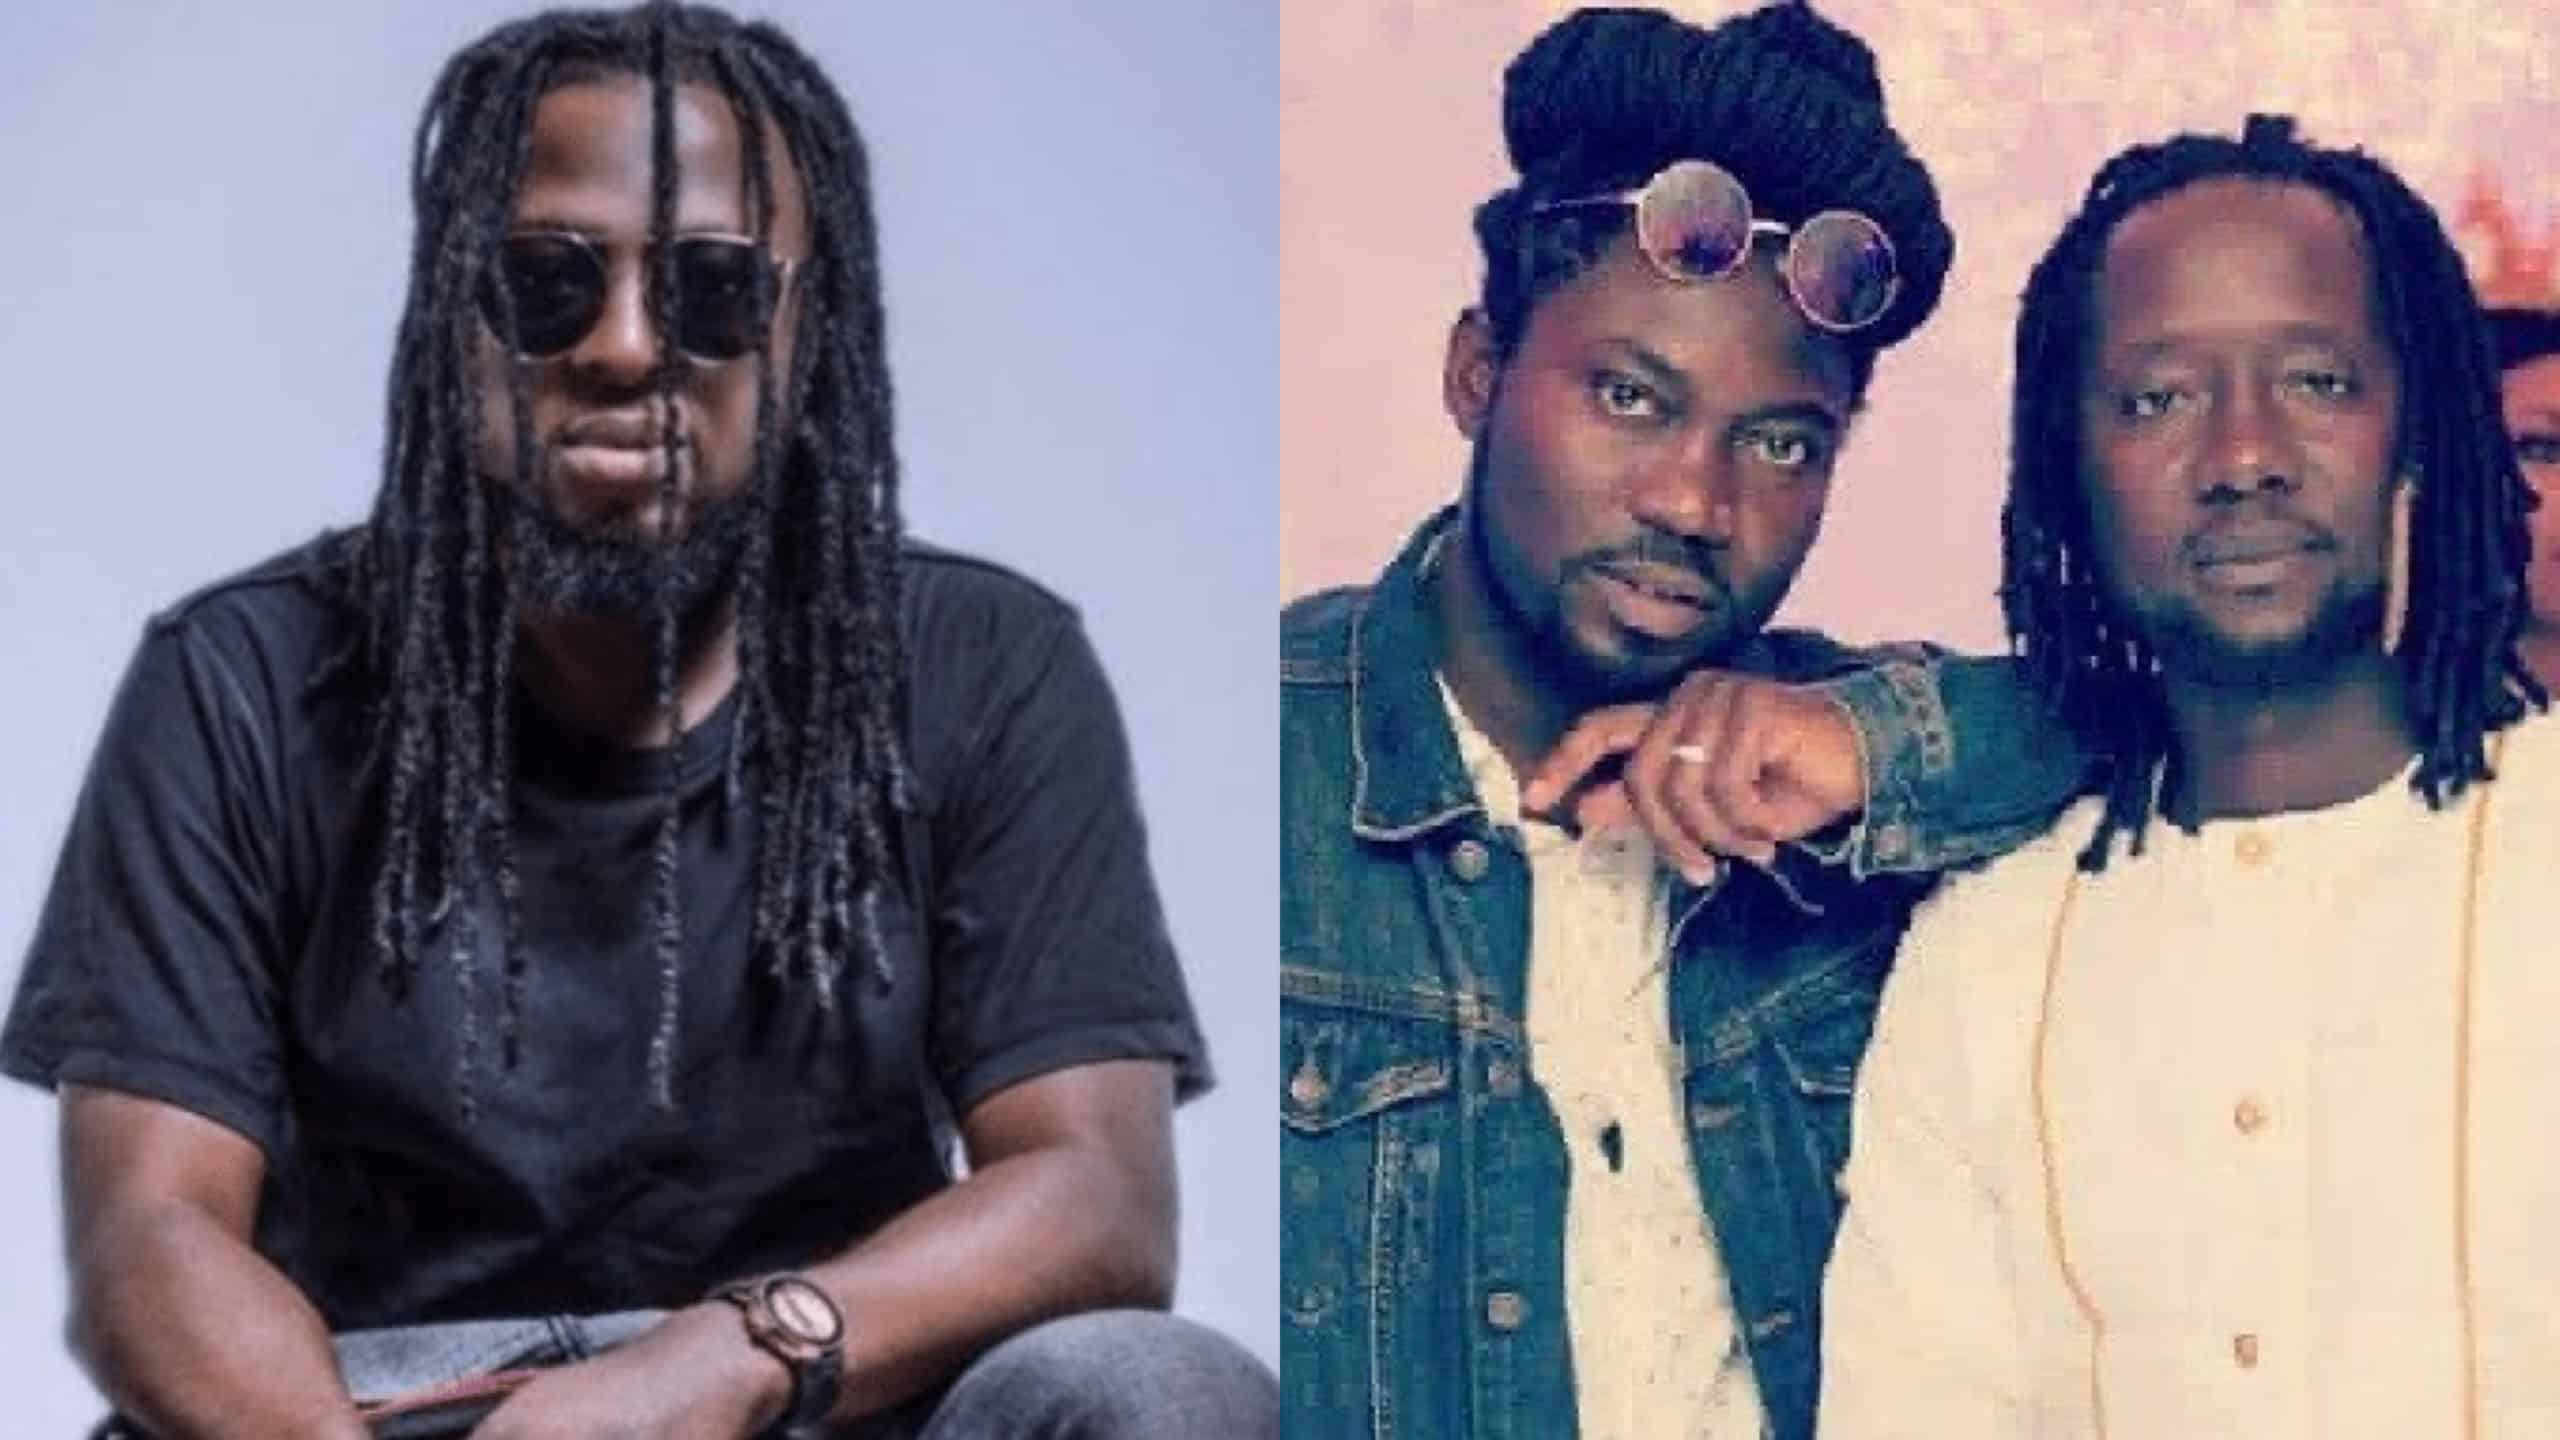 "I regret investing over 65K in Wutah, they're selfish ingrates" – Guru gives chilly details about group 